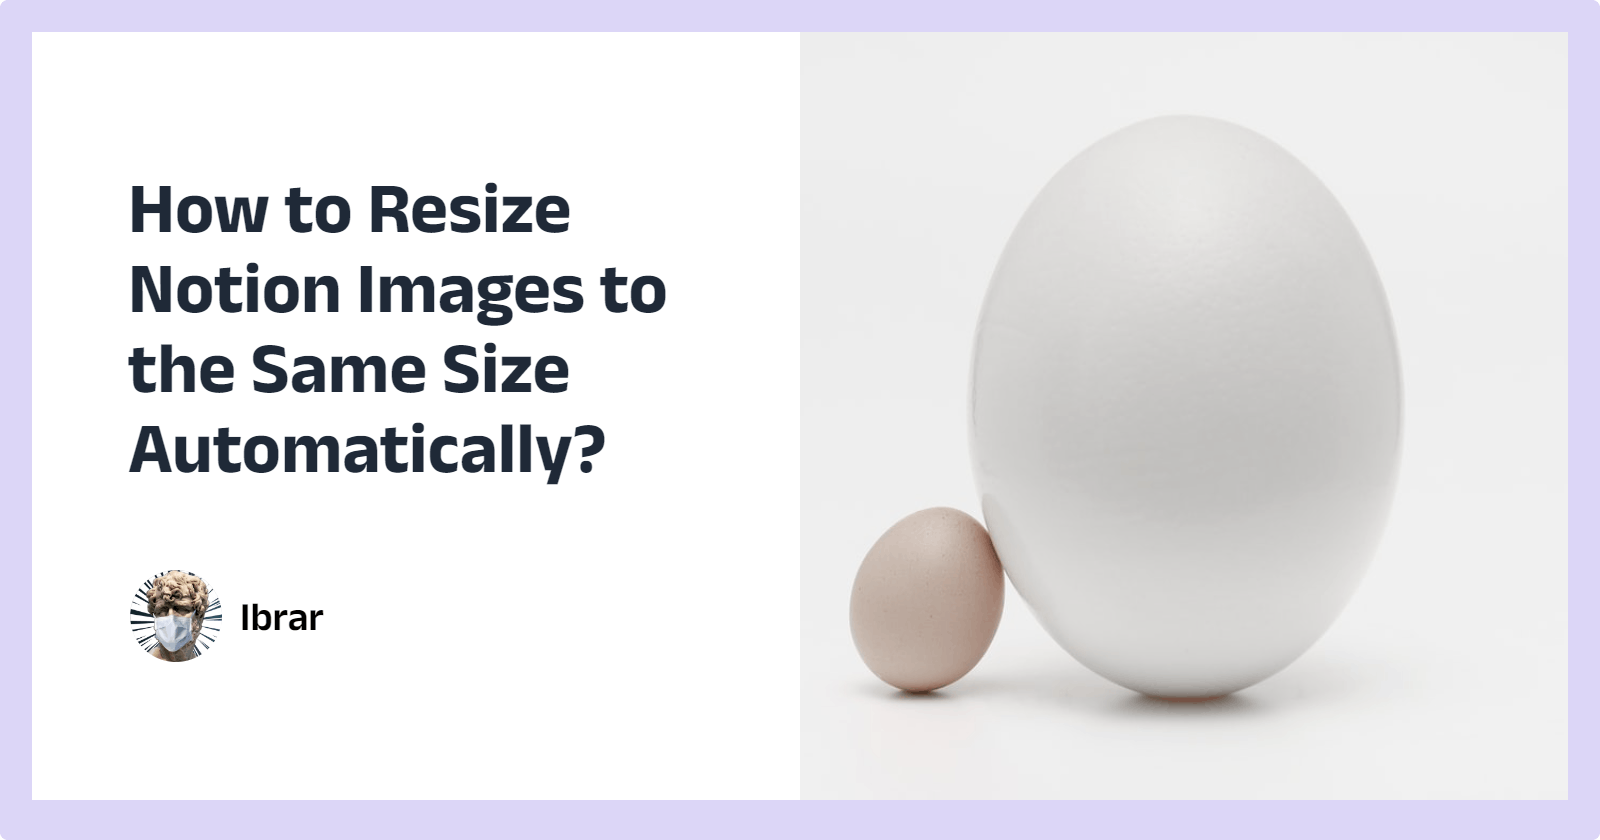 How to Resize Notion Images to the Same Size Automatically?